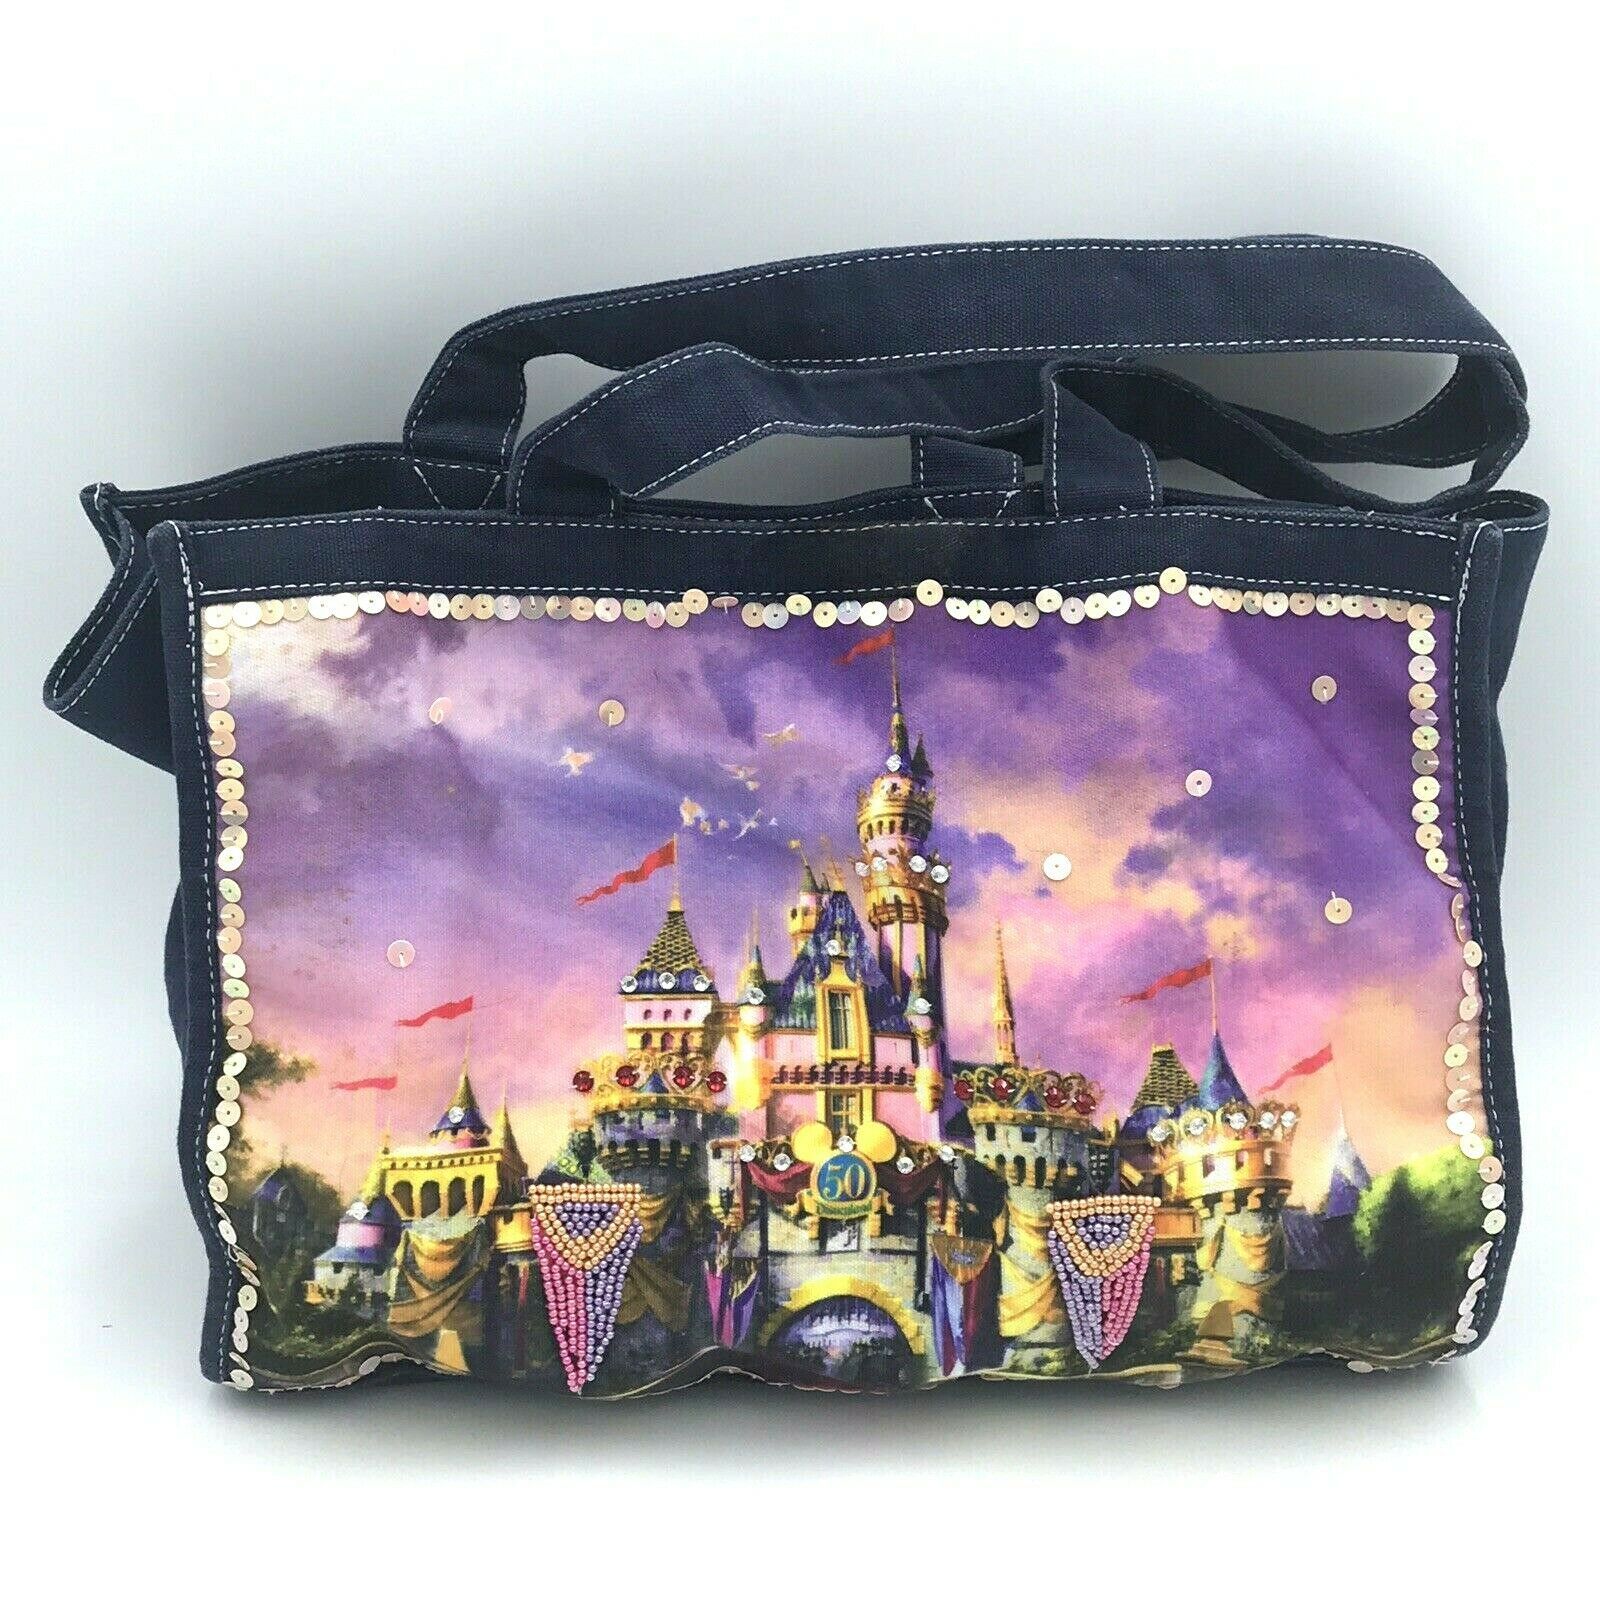 Disneyland 50th Anniversary Beaded Sequin Tote Bag Blue Canvas 2005 14" Strap - $19.99